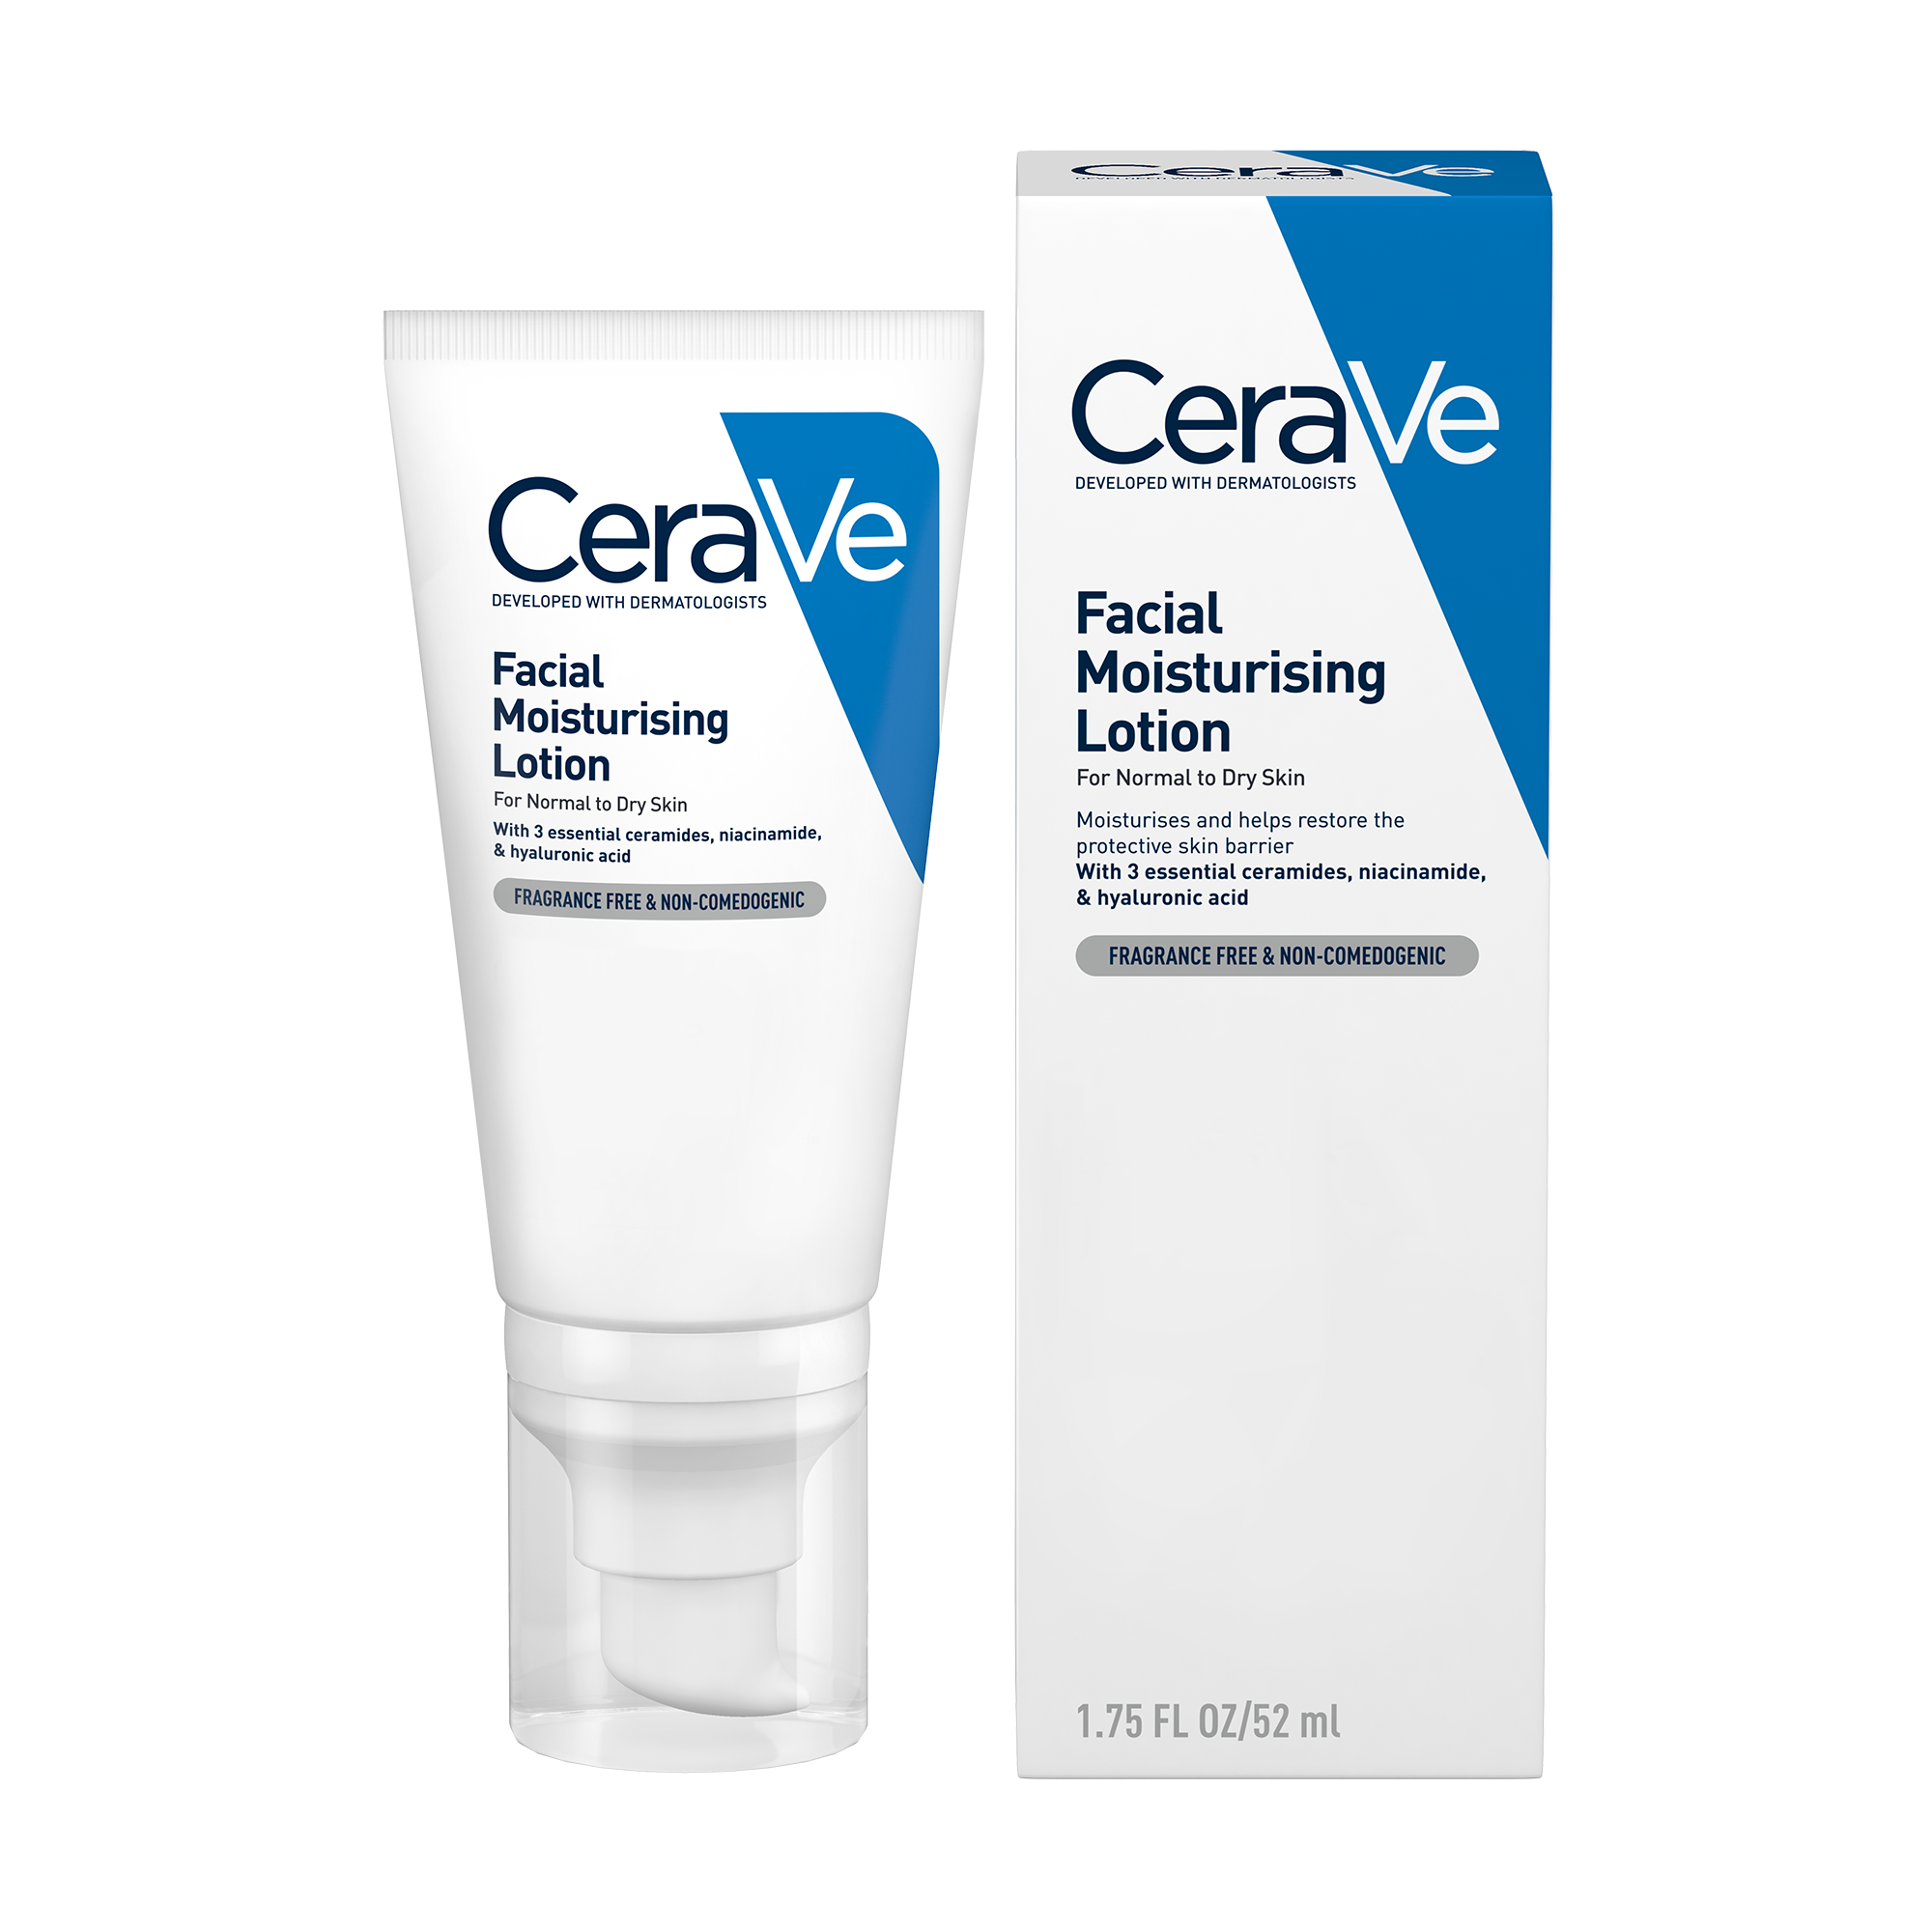 McCartan's Pharmacy CERAVE PM FACIAL MOISTURISING LOTION 52ML CERAVE PM FACIAL MOISTURISING LOTION 52ML CERAVE HYDRATING CREAM TO FOAM CLEANSER 236ML CERAVE HYDRATING CREAM TO FOAM CLEANSER 236ML CERAVE HA SERUM 30ML CERAVE HA SERUM 30ML CERAVE FOAMING CLEANSER 473ML CERAVE FOAMING CLEANSER 473ML CERAVE FOAMING CLEANSER 236ML CERAVE FOAMING CLEANSER 236ML CERAVE EYE REPAIR CREAM 14ML CERAVE EYE REPAIR CREAM 14ML CERAVE AM FACIAL MOISTURISING LOTION 52ML